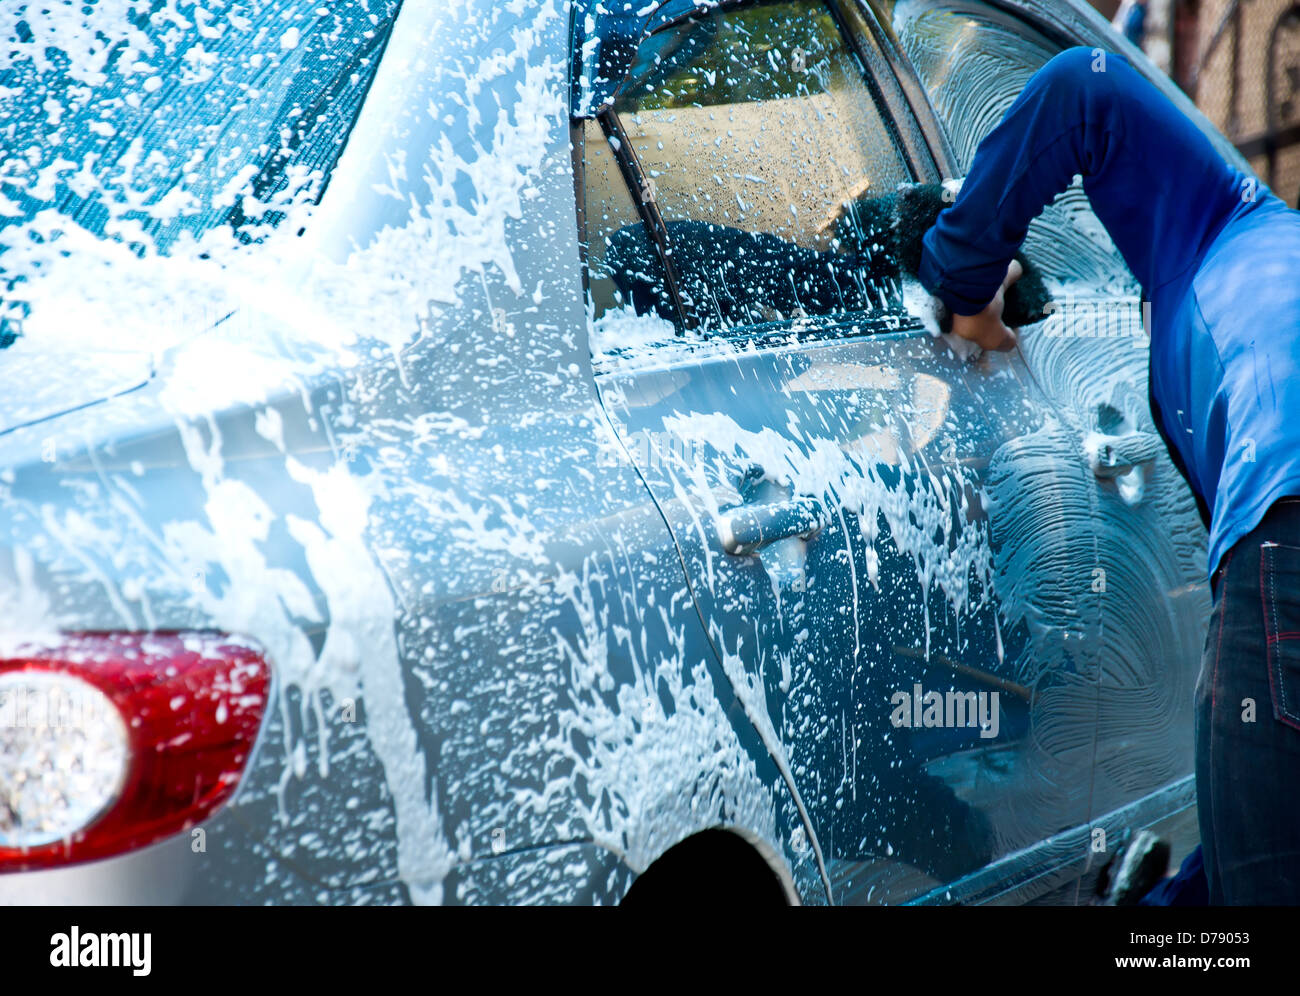 cleaning car by clean car care Stock Photo